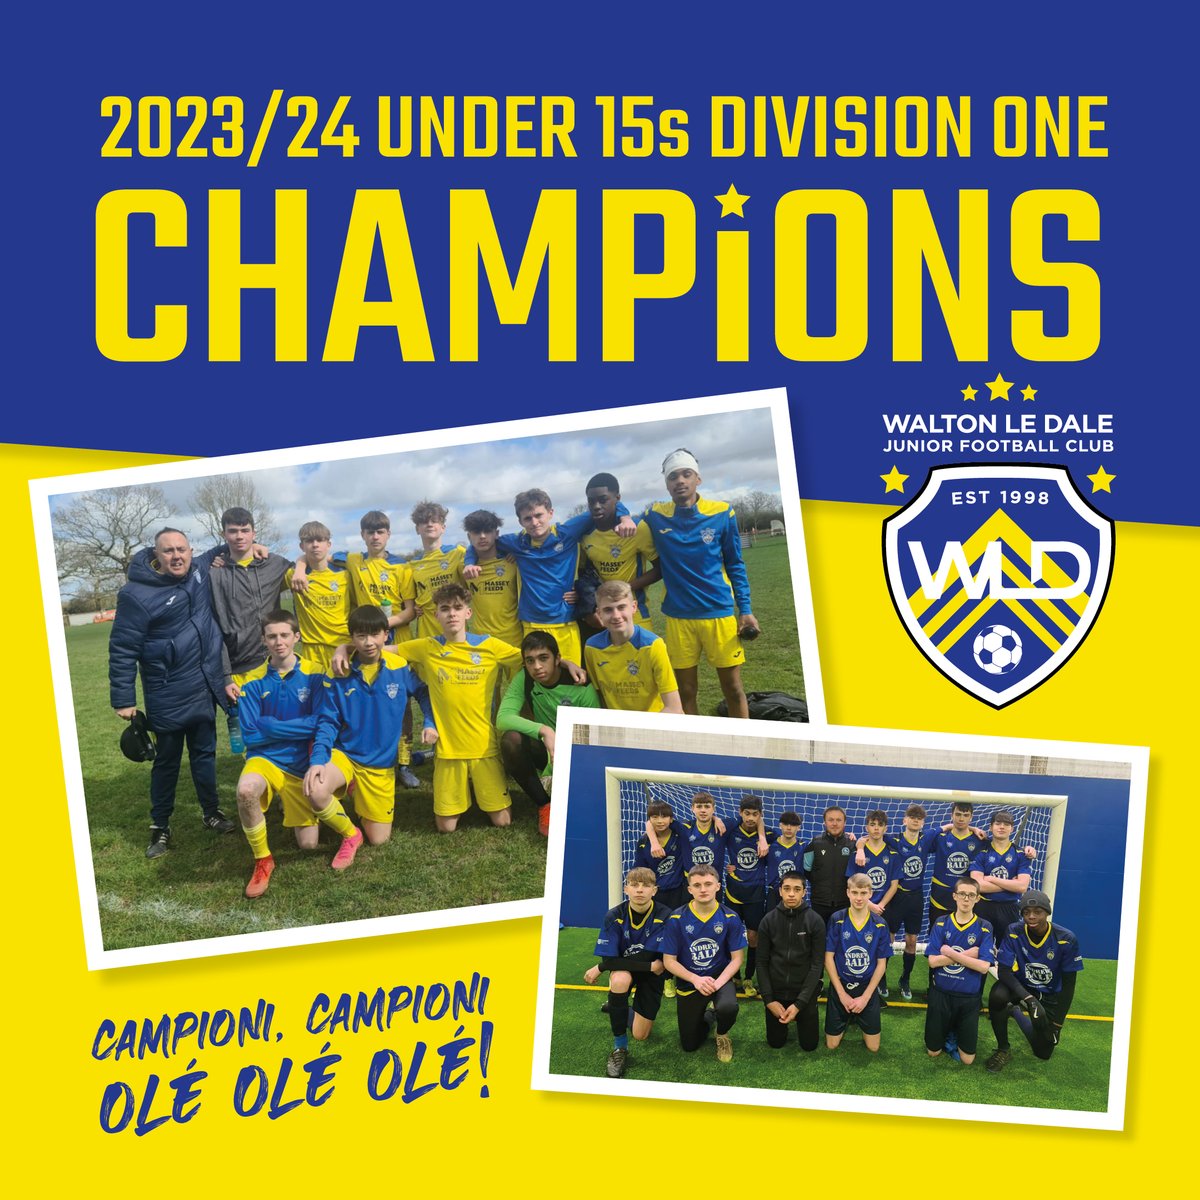 Huge congratulations to our Under 15 boys team who chalked up yet another win on the road today, and moved 10 points clear with three games left to play... confirming their place as Division One Champions 2023/24! Well done lads - we couldn't be more proud of you. 🏆💛⚽️